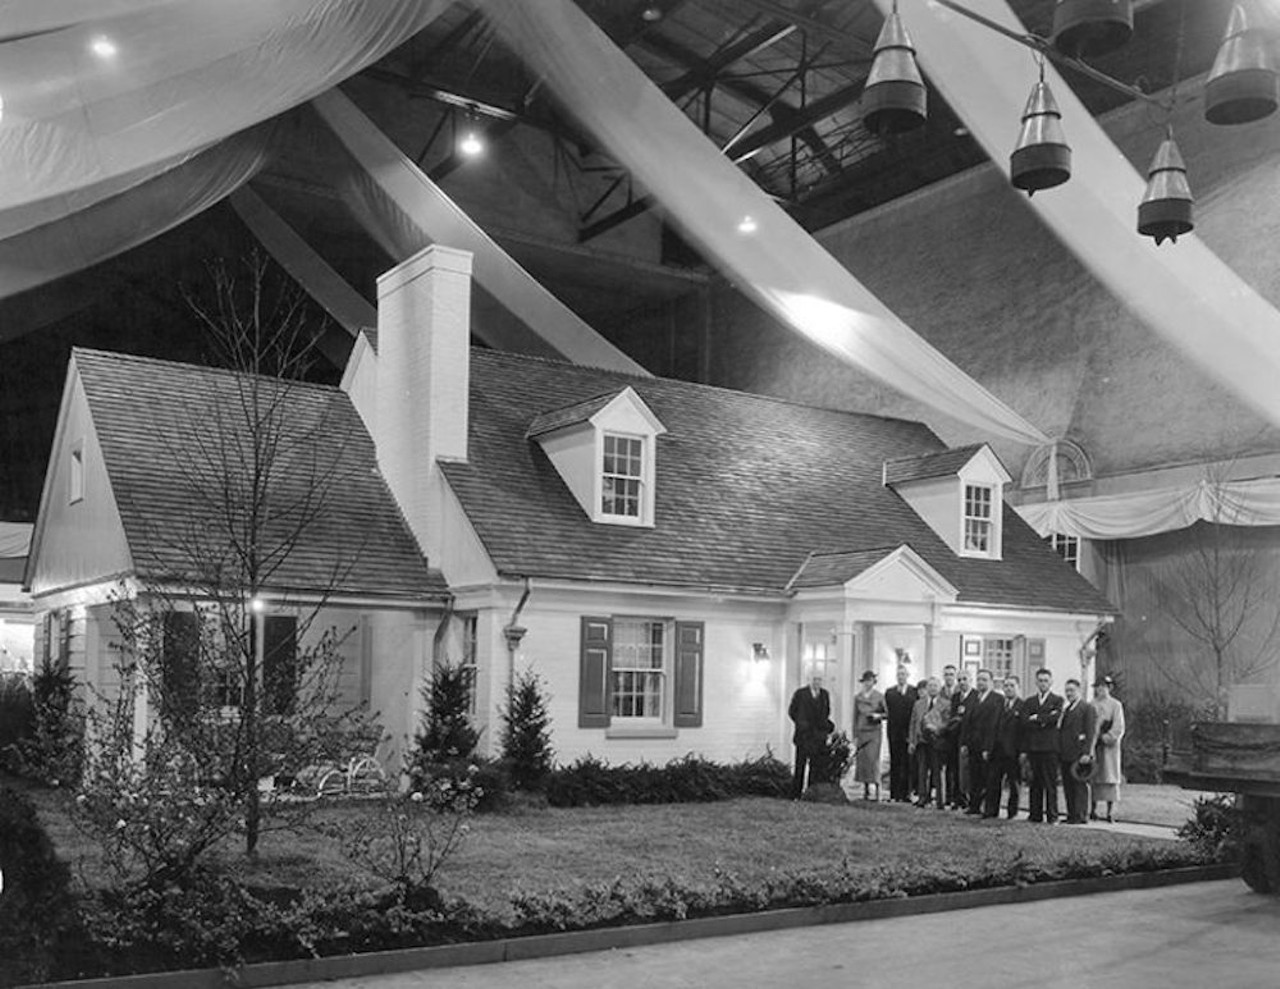 In 1935, the Home Beautiful expo was renamed the "Cincinnati Realtors Home Show and Garden Exposition," and new this year was the chance to see the model home being built. This particular model was later reconstructed at 3824 East Street in Mariemont.